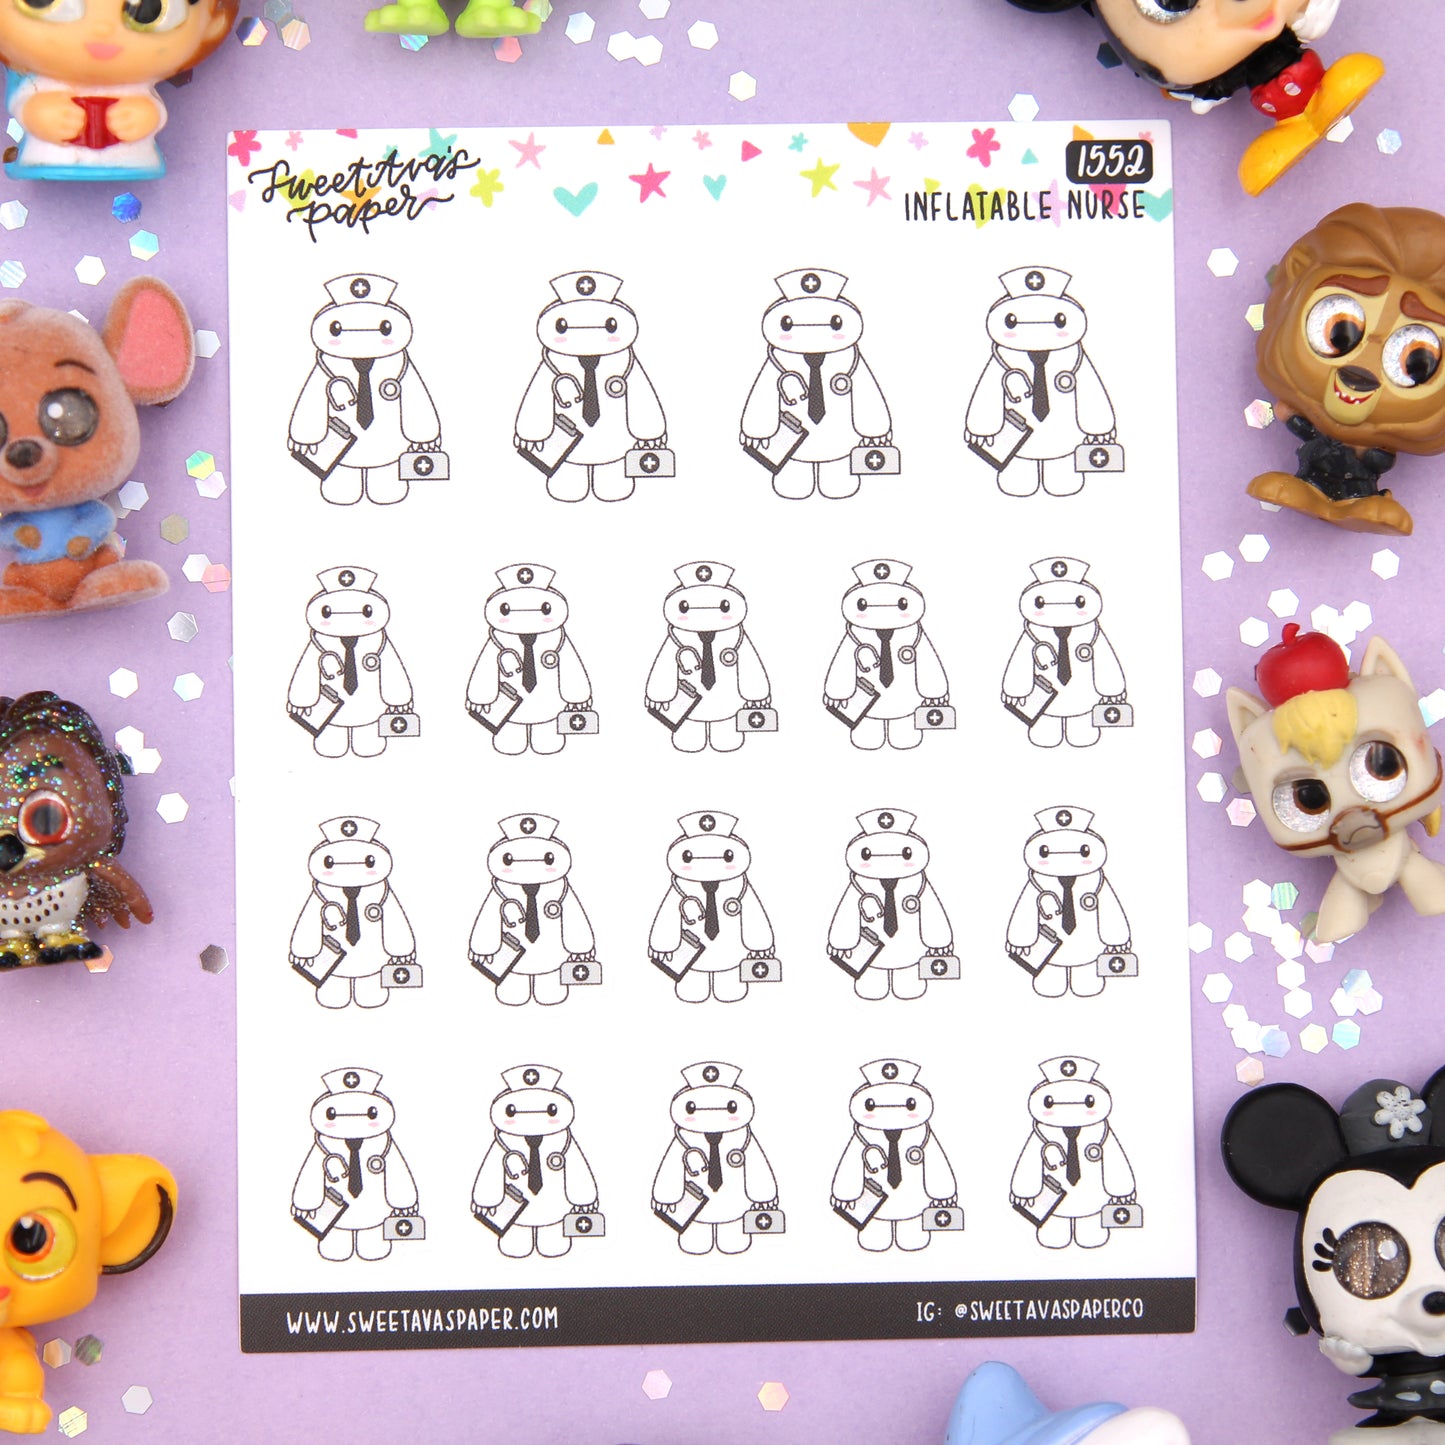 Inflatable Nurse Planner Stickers - Magical Planner Stickers - Magical May - [1552]